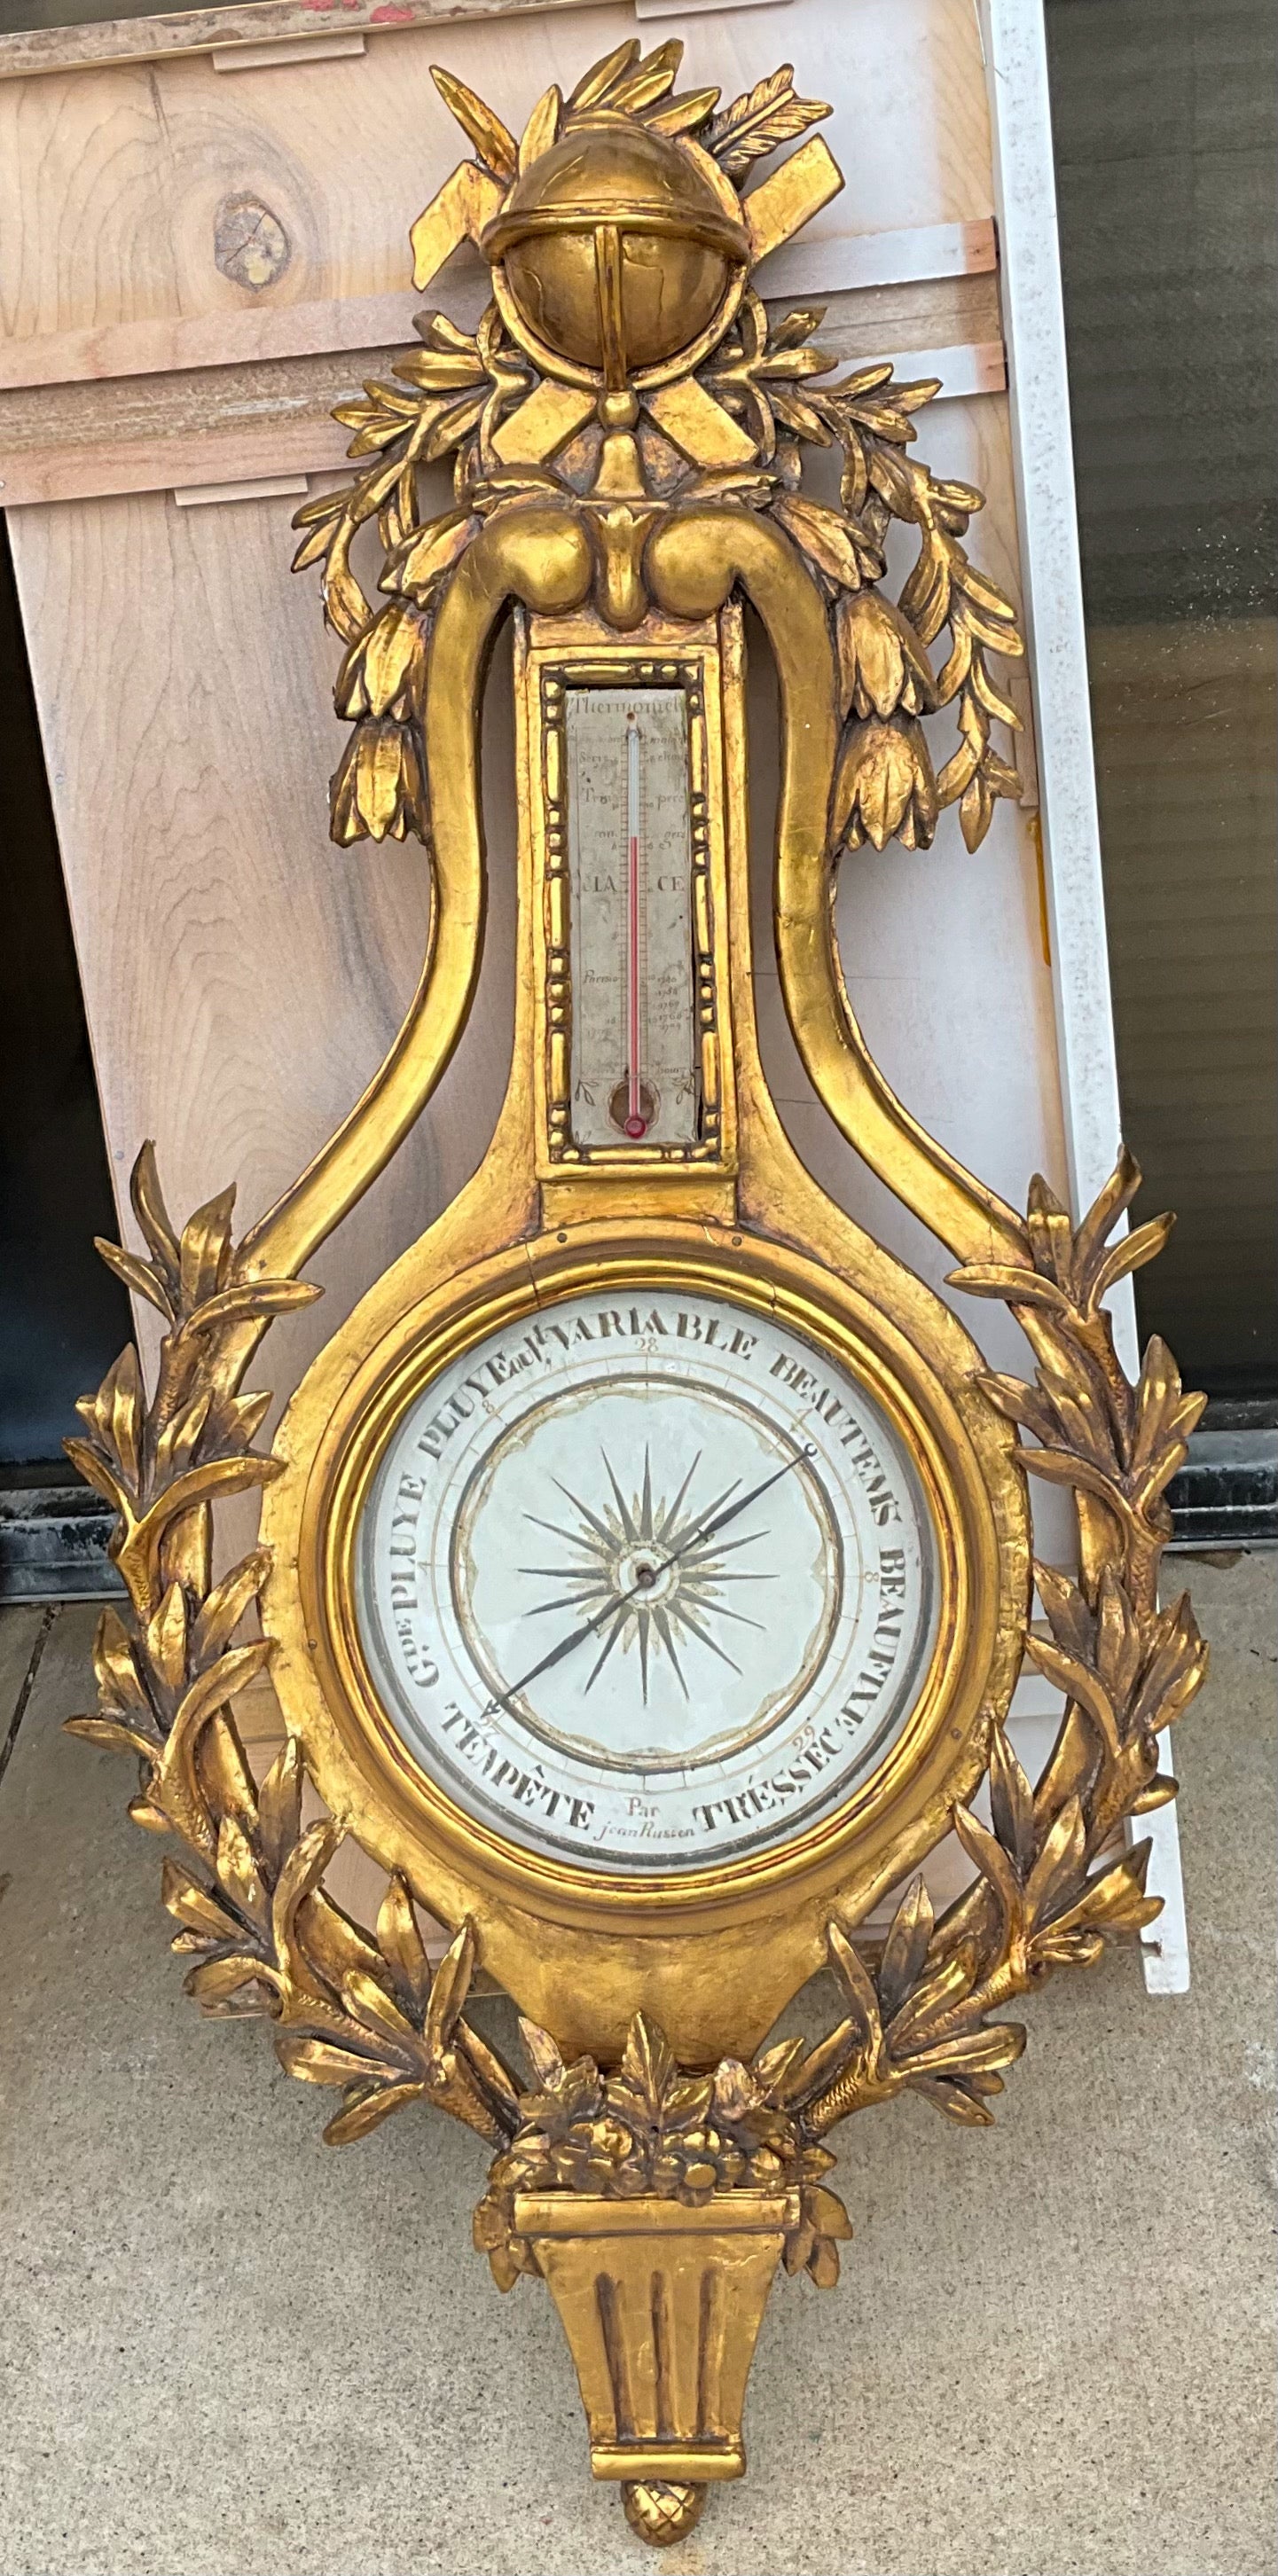 This is amazing! It is a 19th century French Louis XVI style carved giltwood barometer. The crest appears to be a carved armillary of some sort with cascading laurel leaves and branches. It appears to be signed. Antique condition with a beautiful